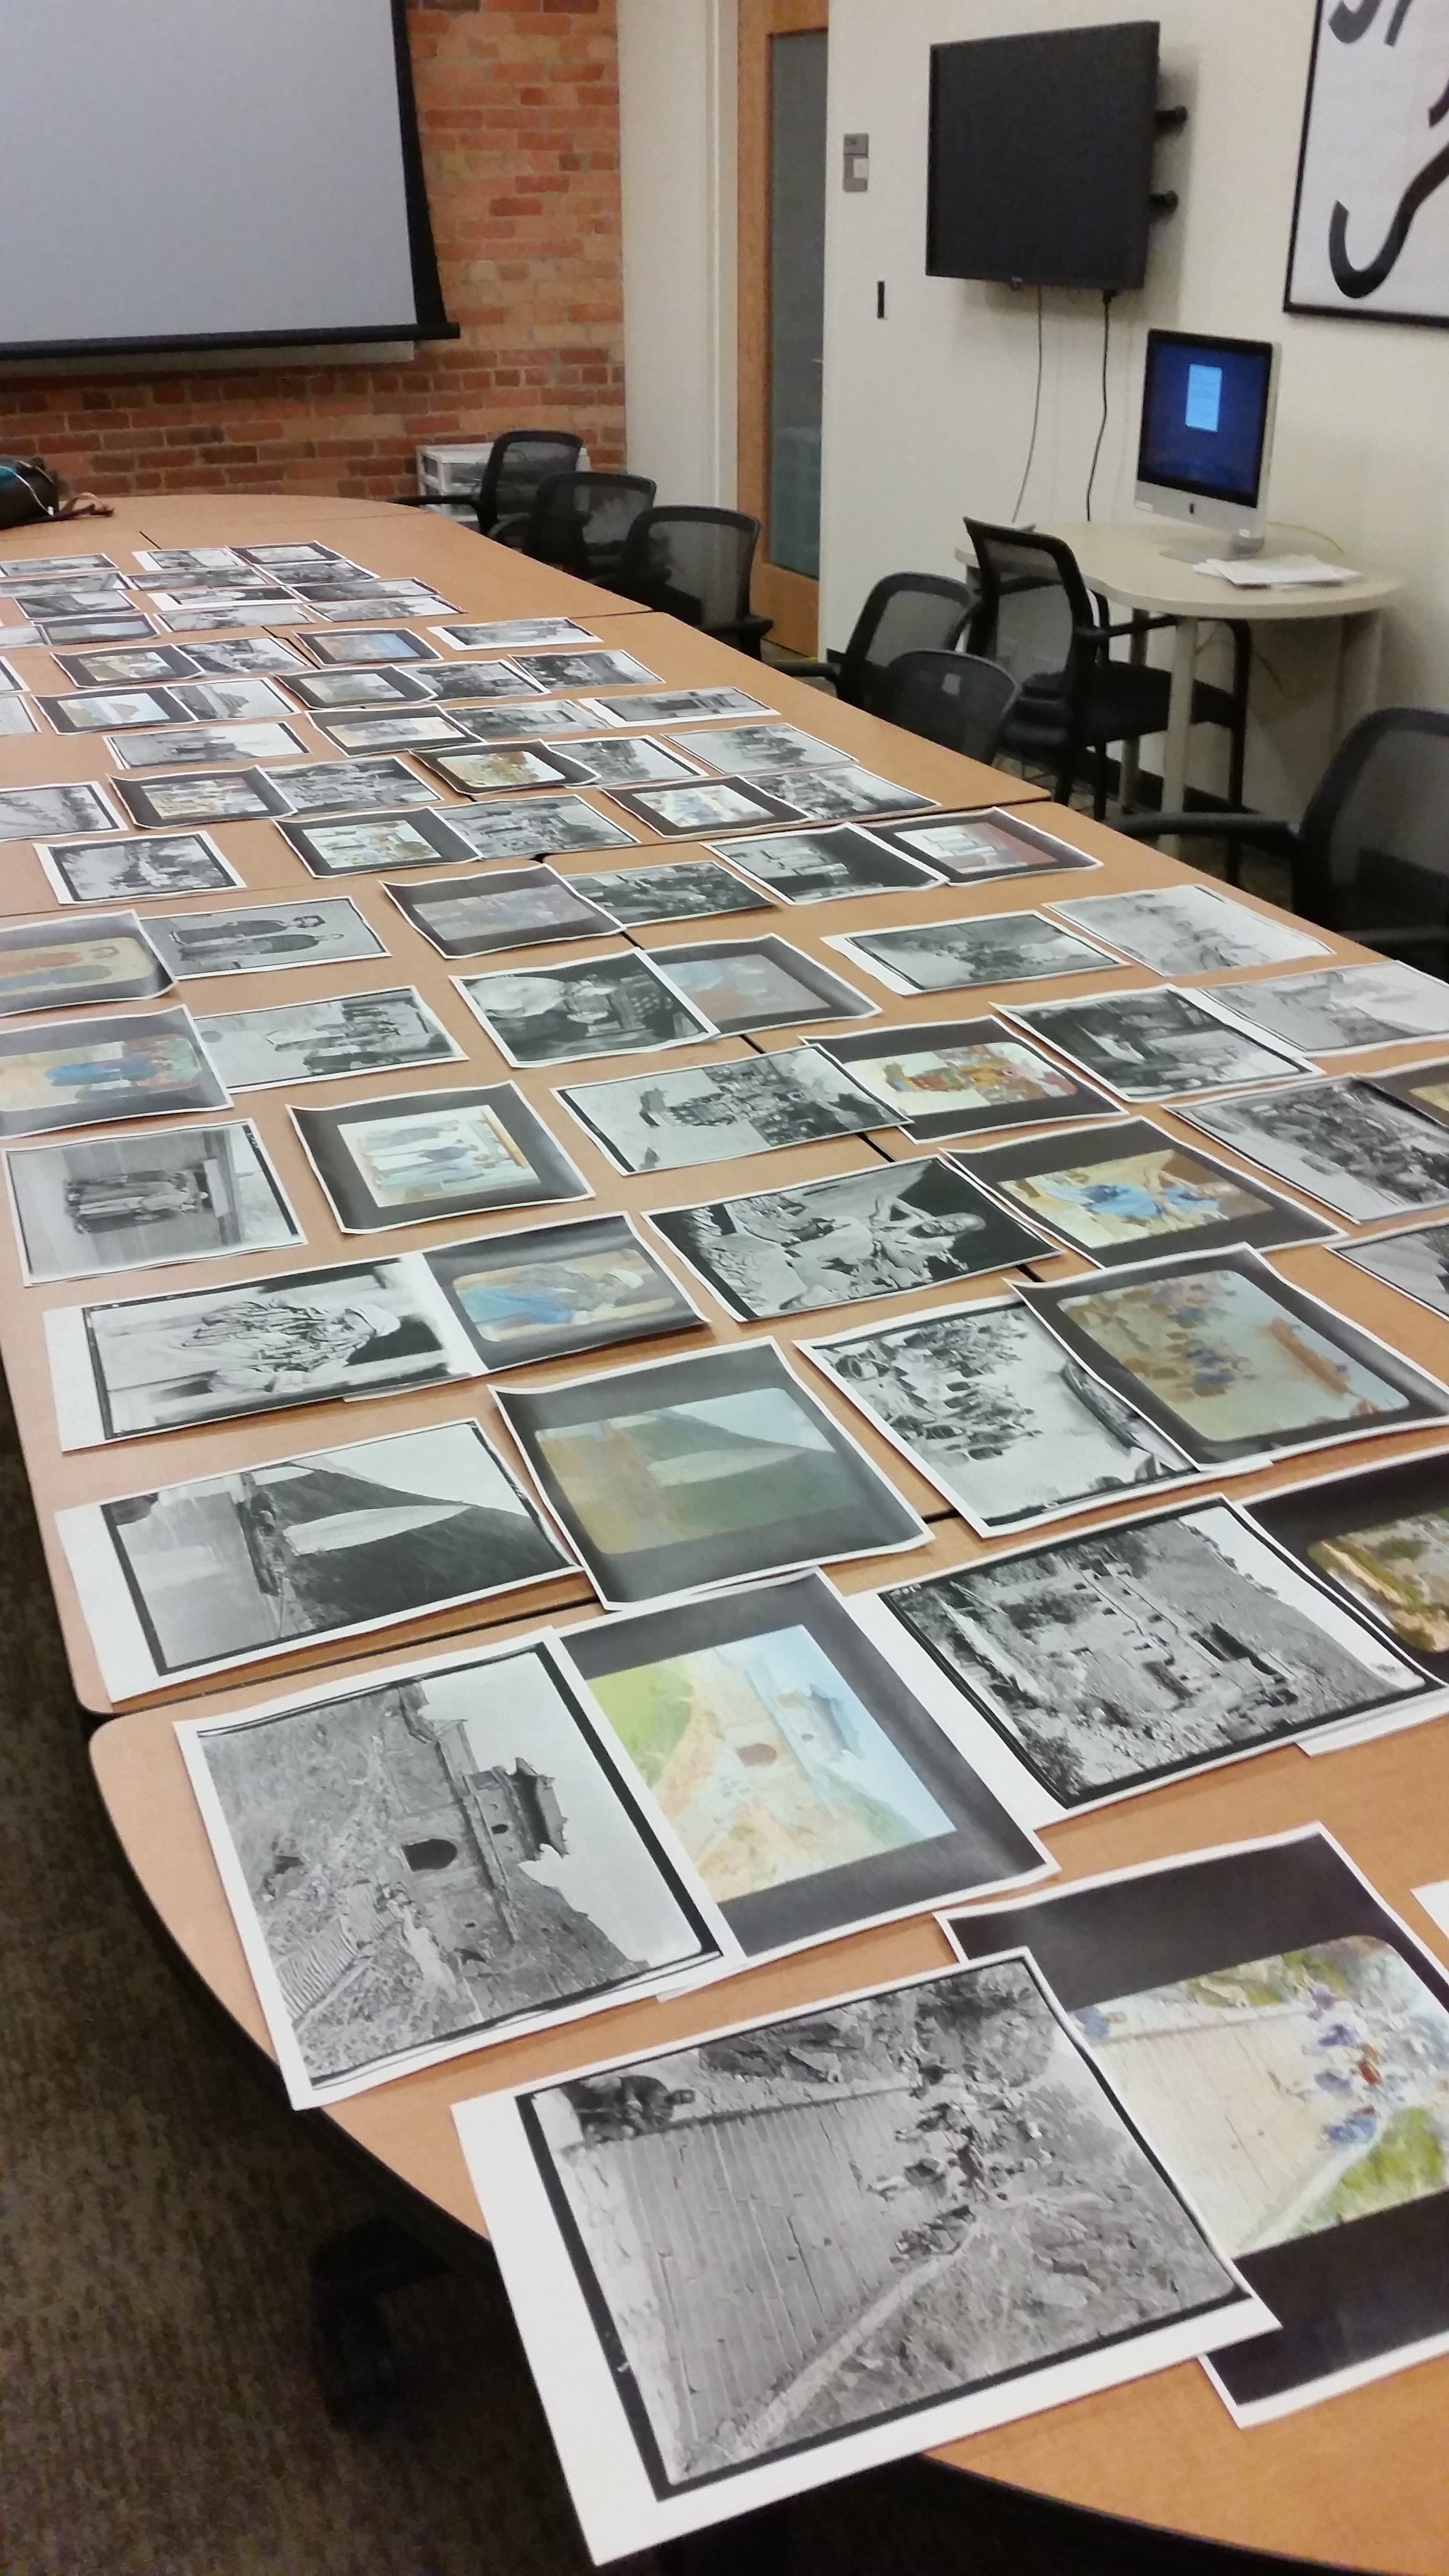 The images laid out on the big table